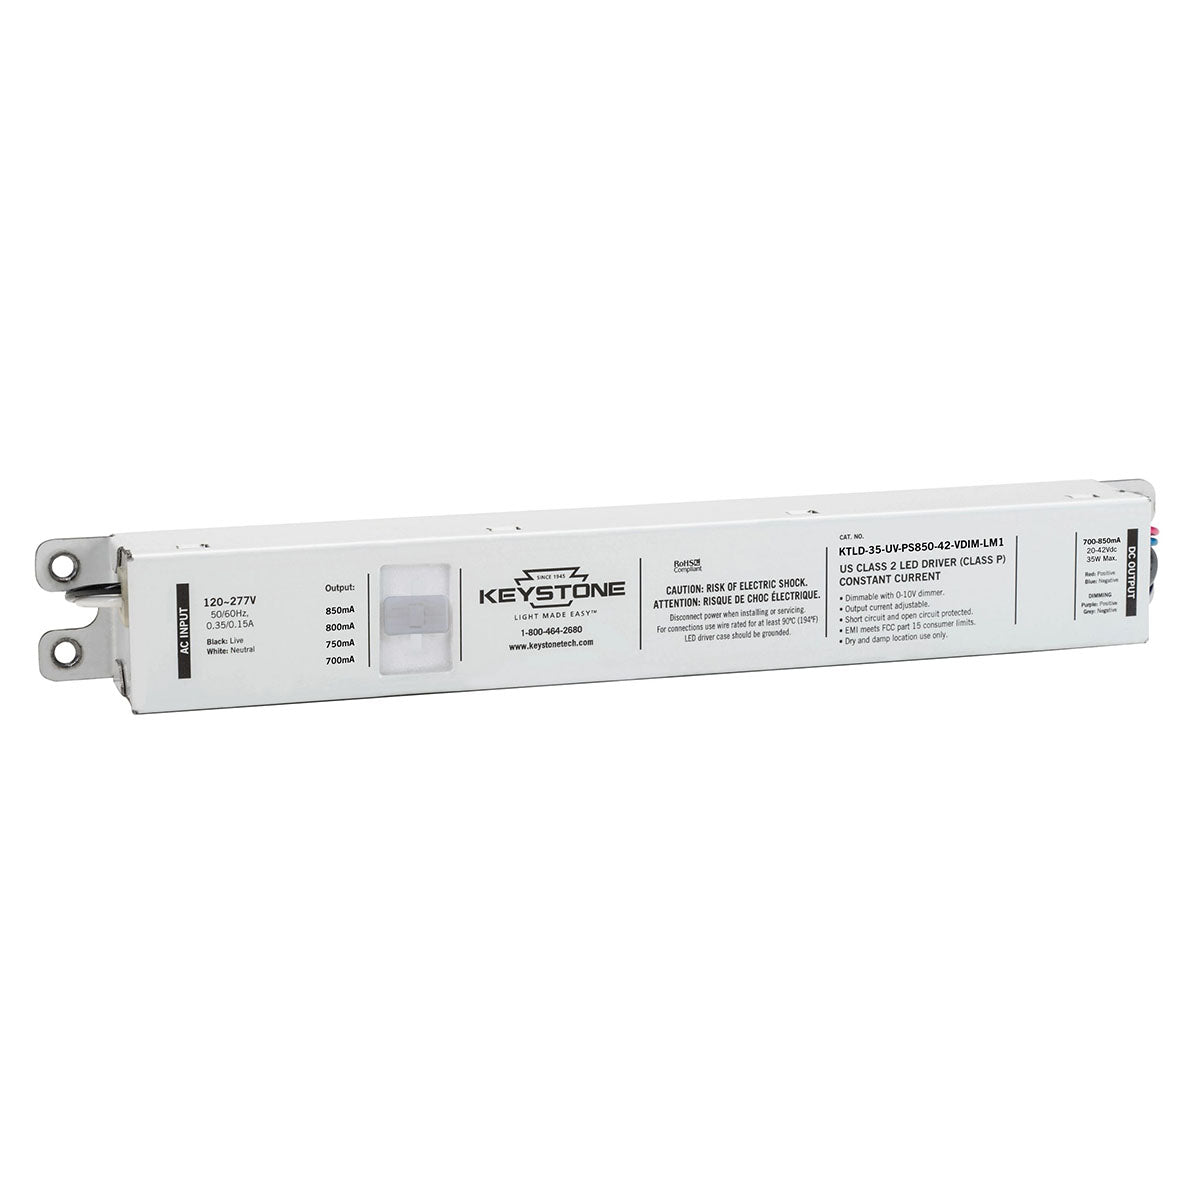 Power Select LED Driver, 35W, Adjustable Constant Current 700-850mA, 0-10V Dimming, 120-277V Input